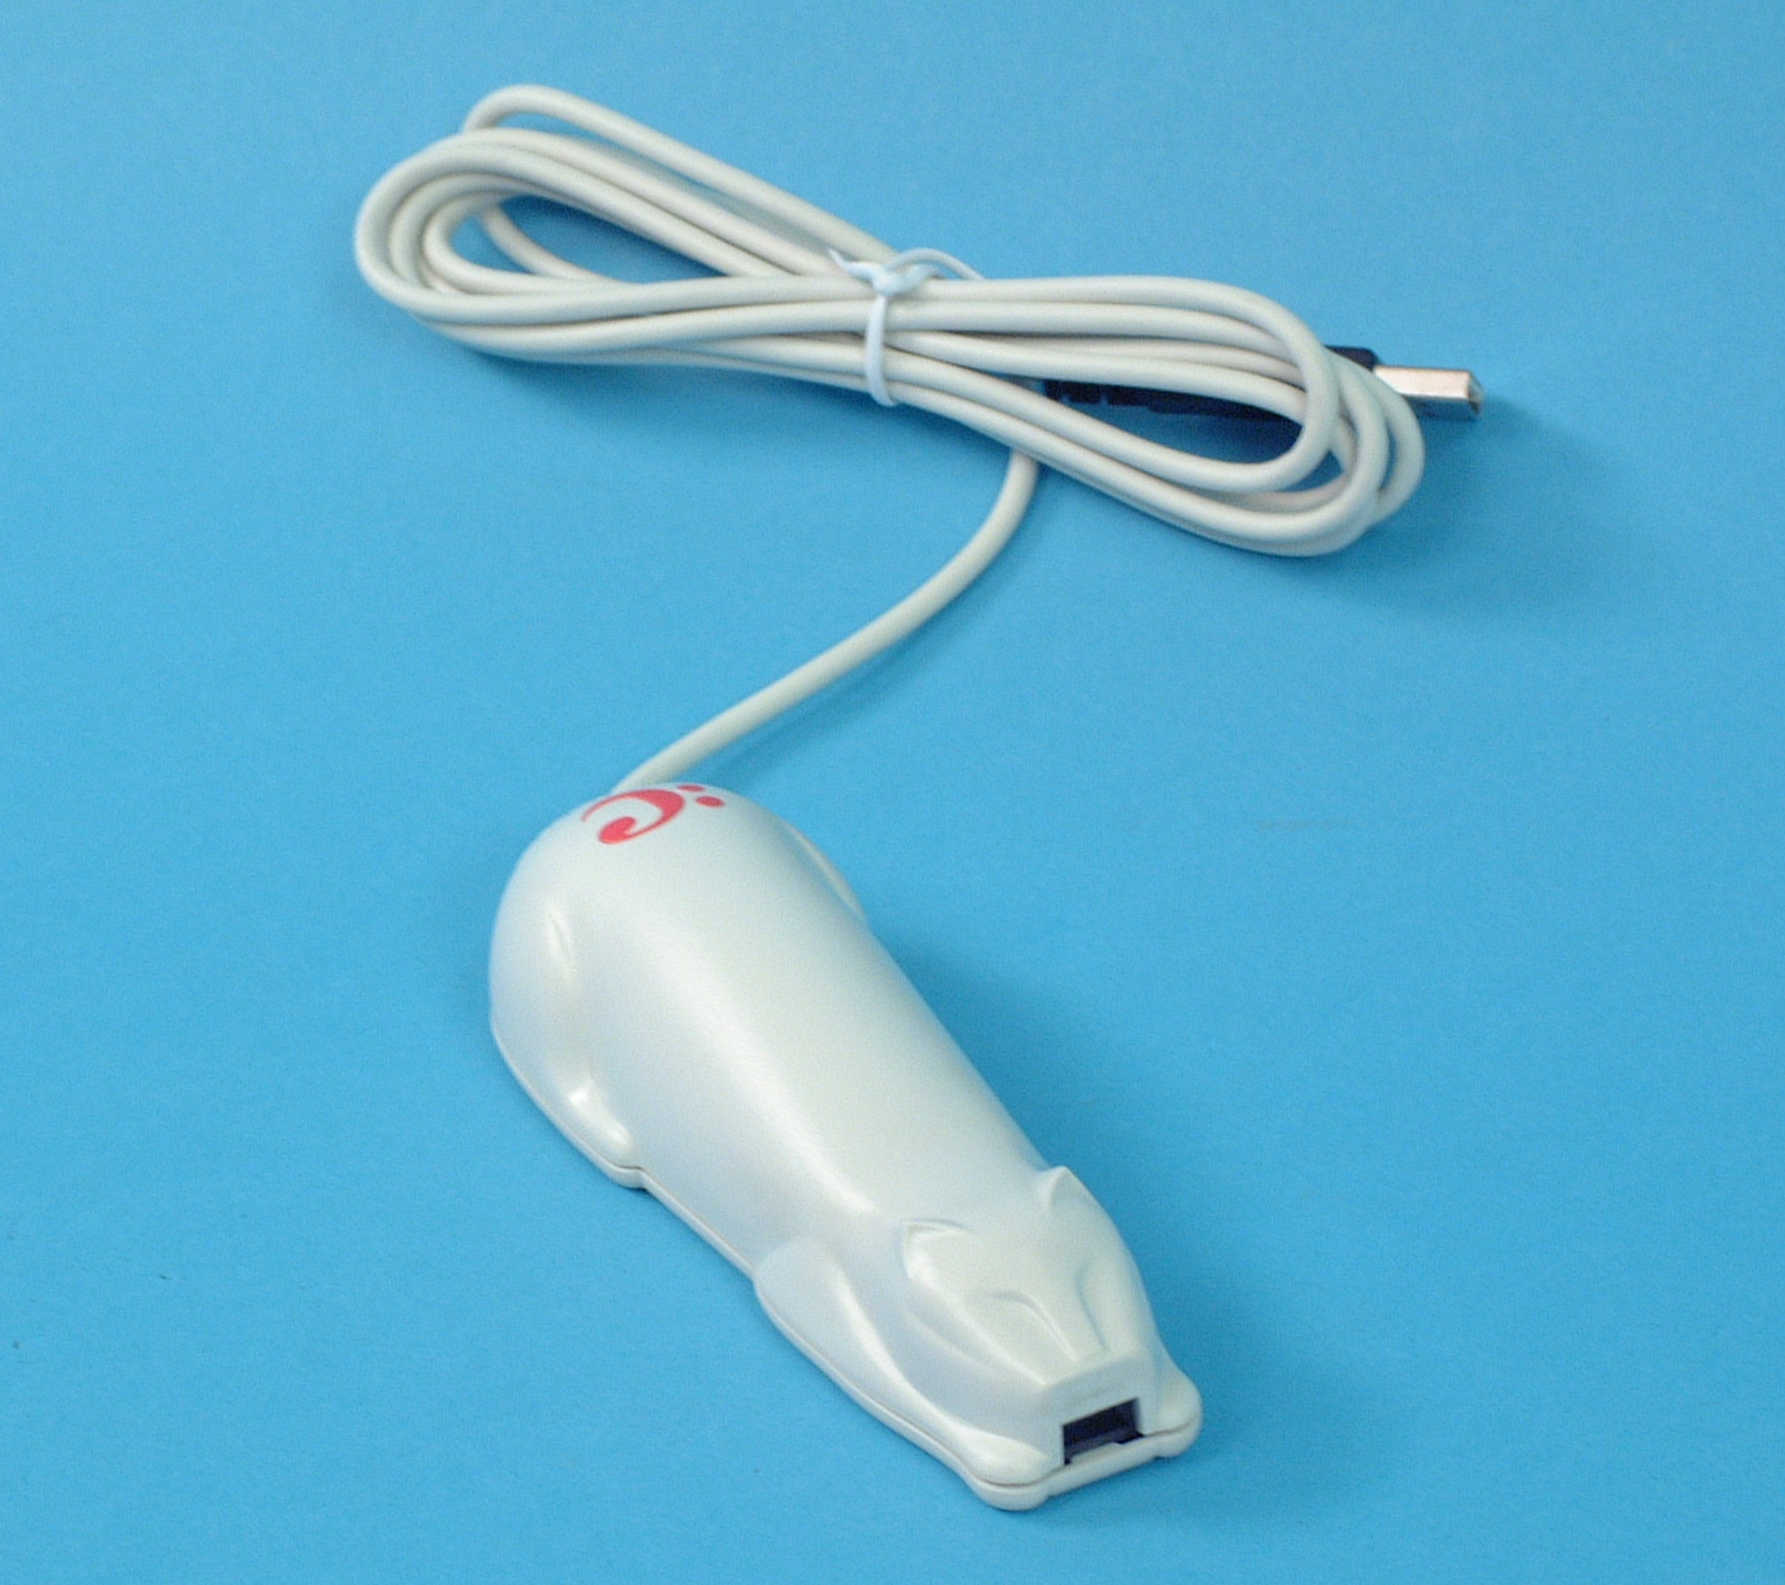 Brand New Modified USB CueCat Cue Cat Barcode Scanner 